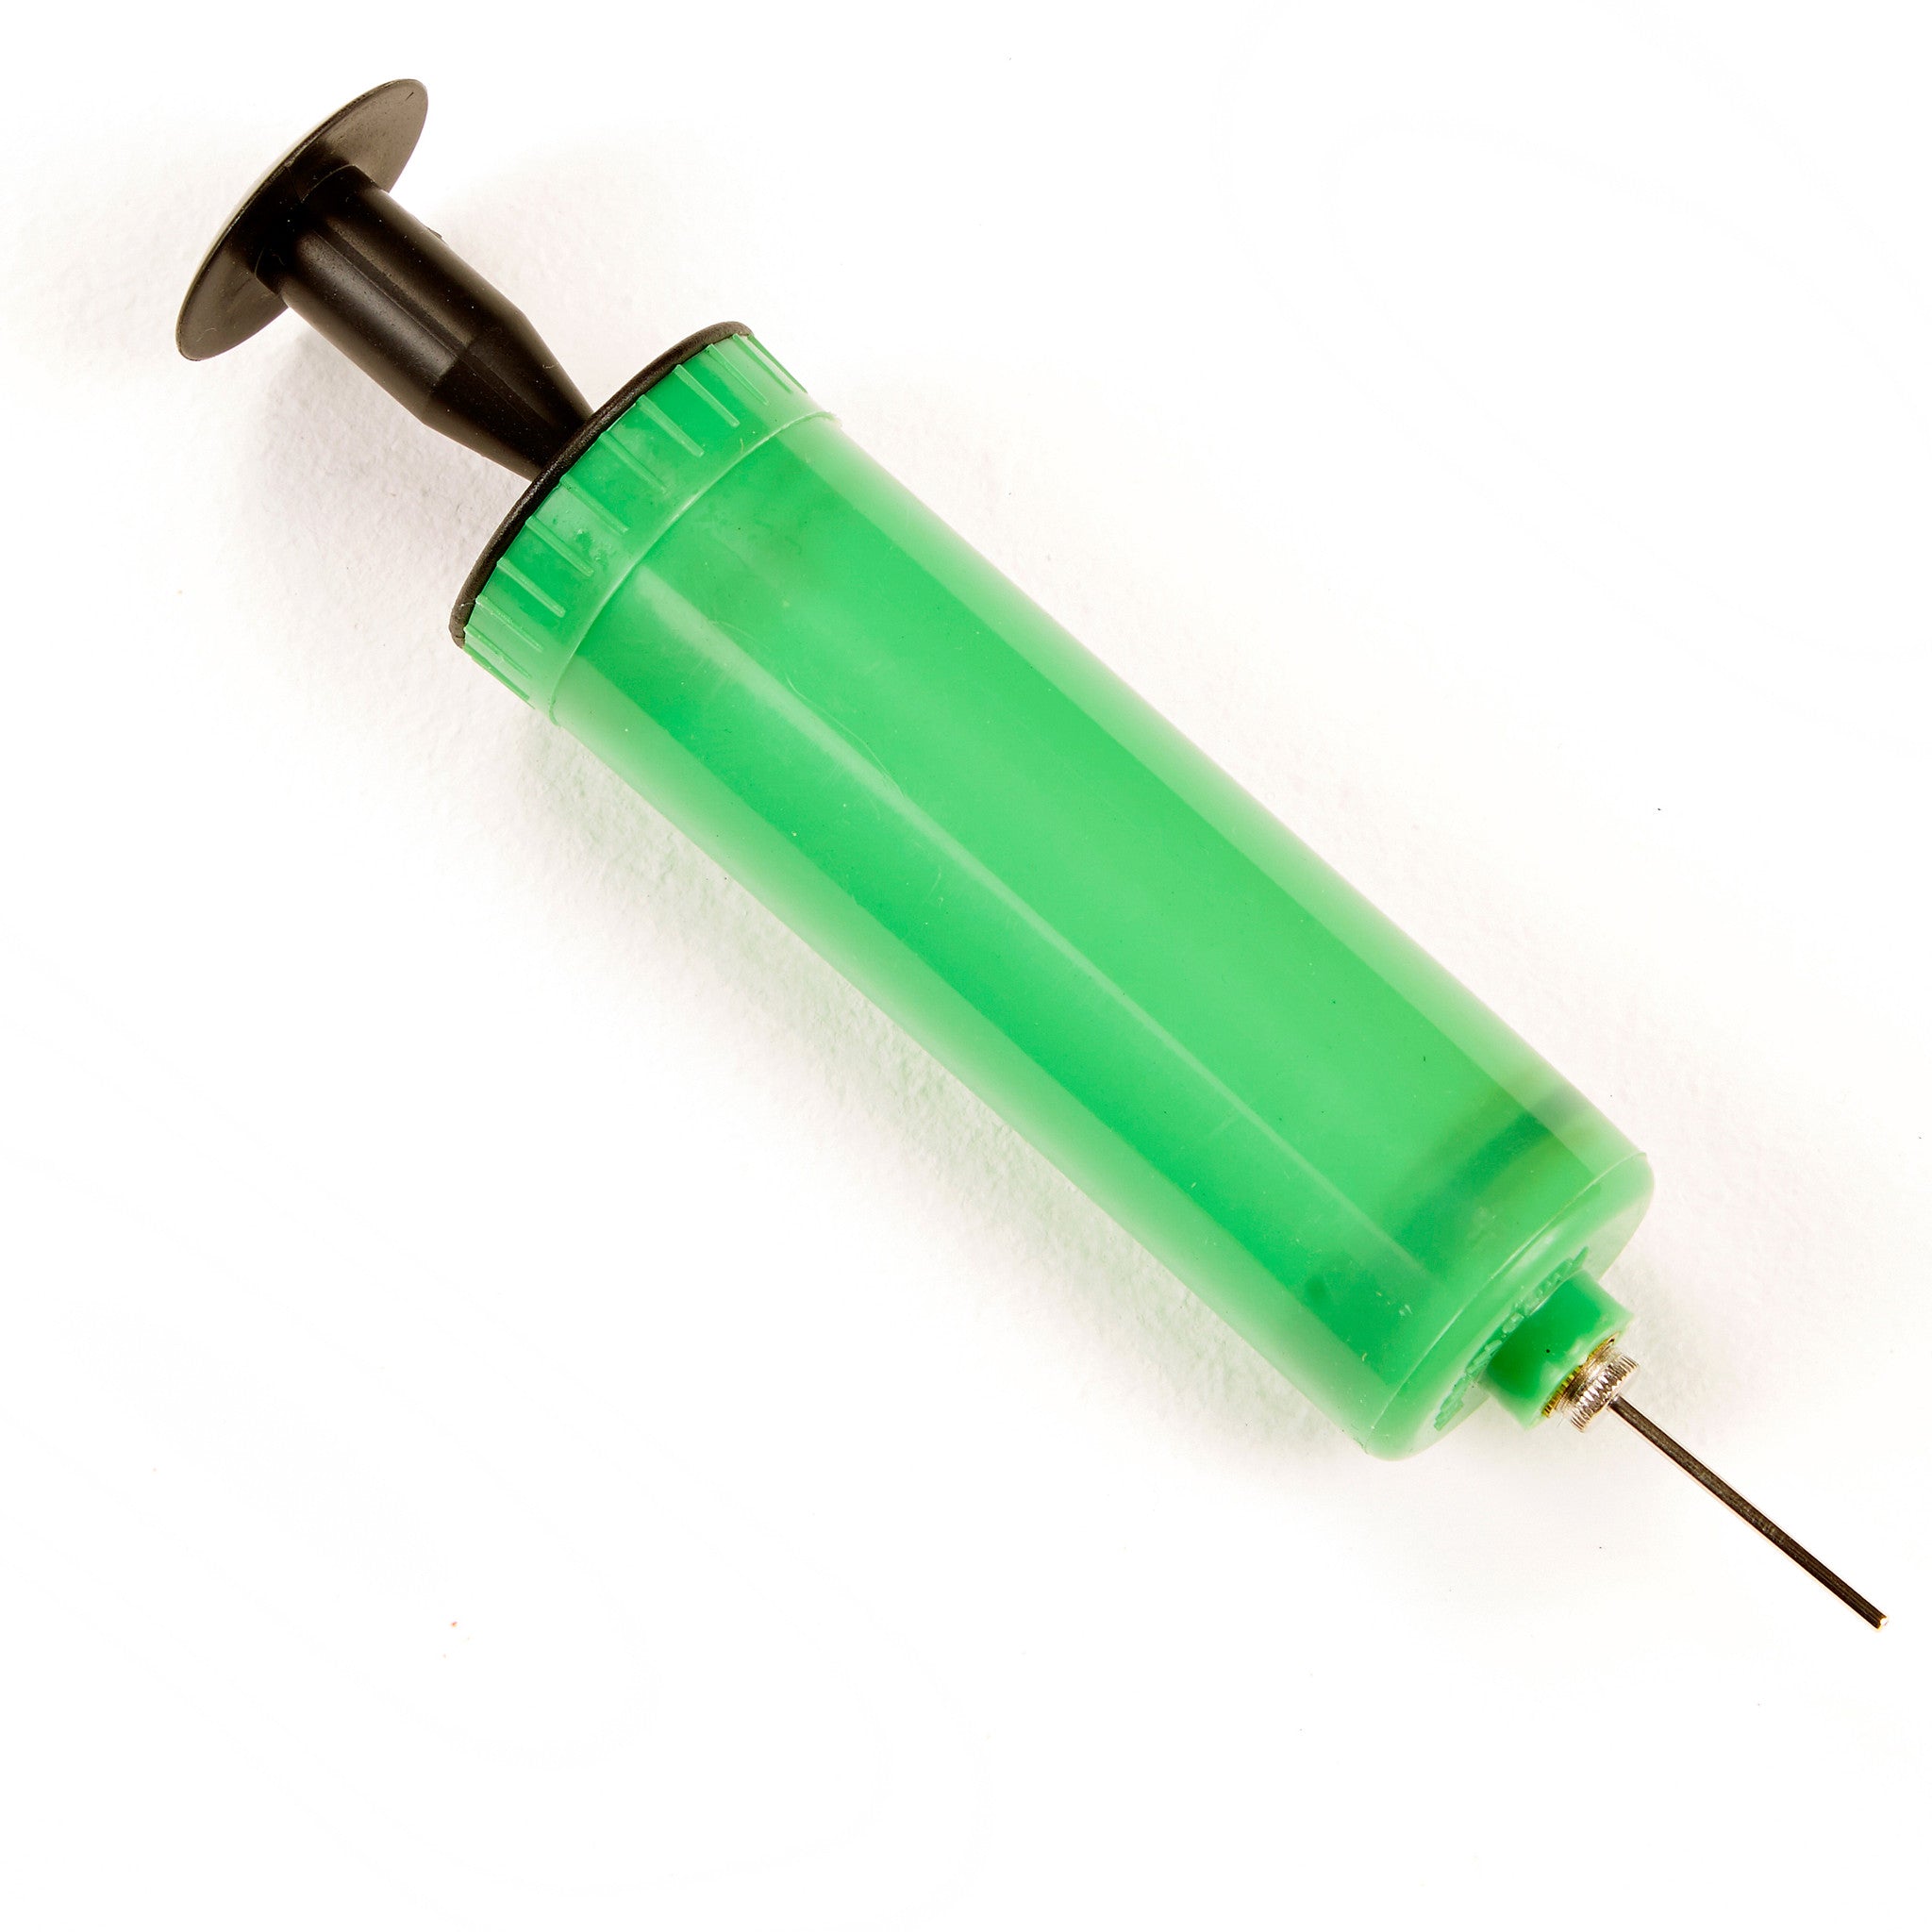 Green Needle Pump for sports ball inflation.